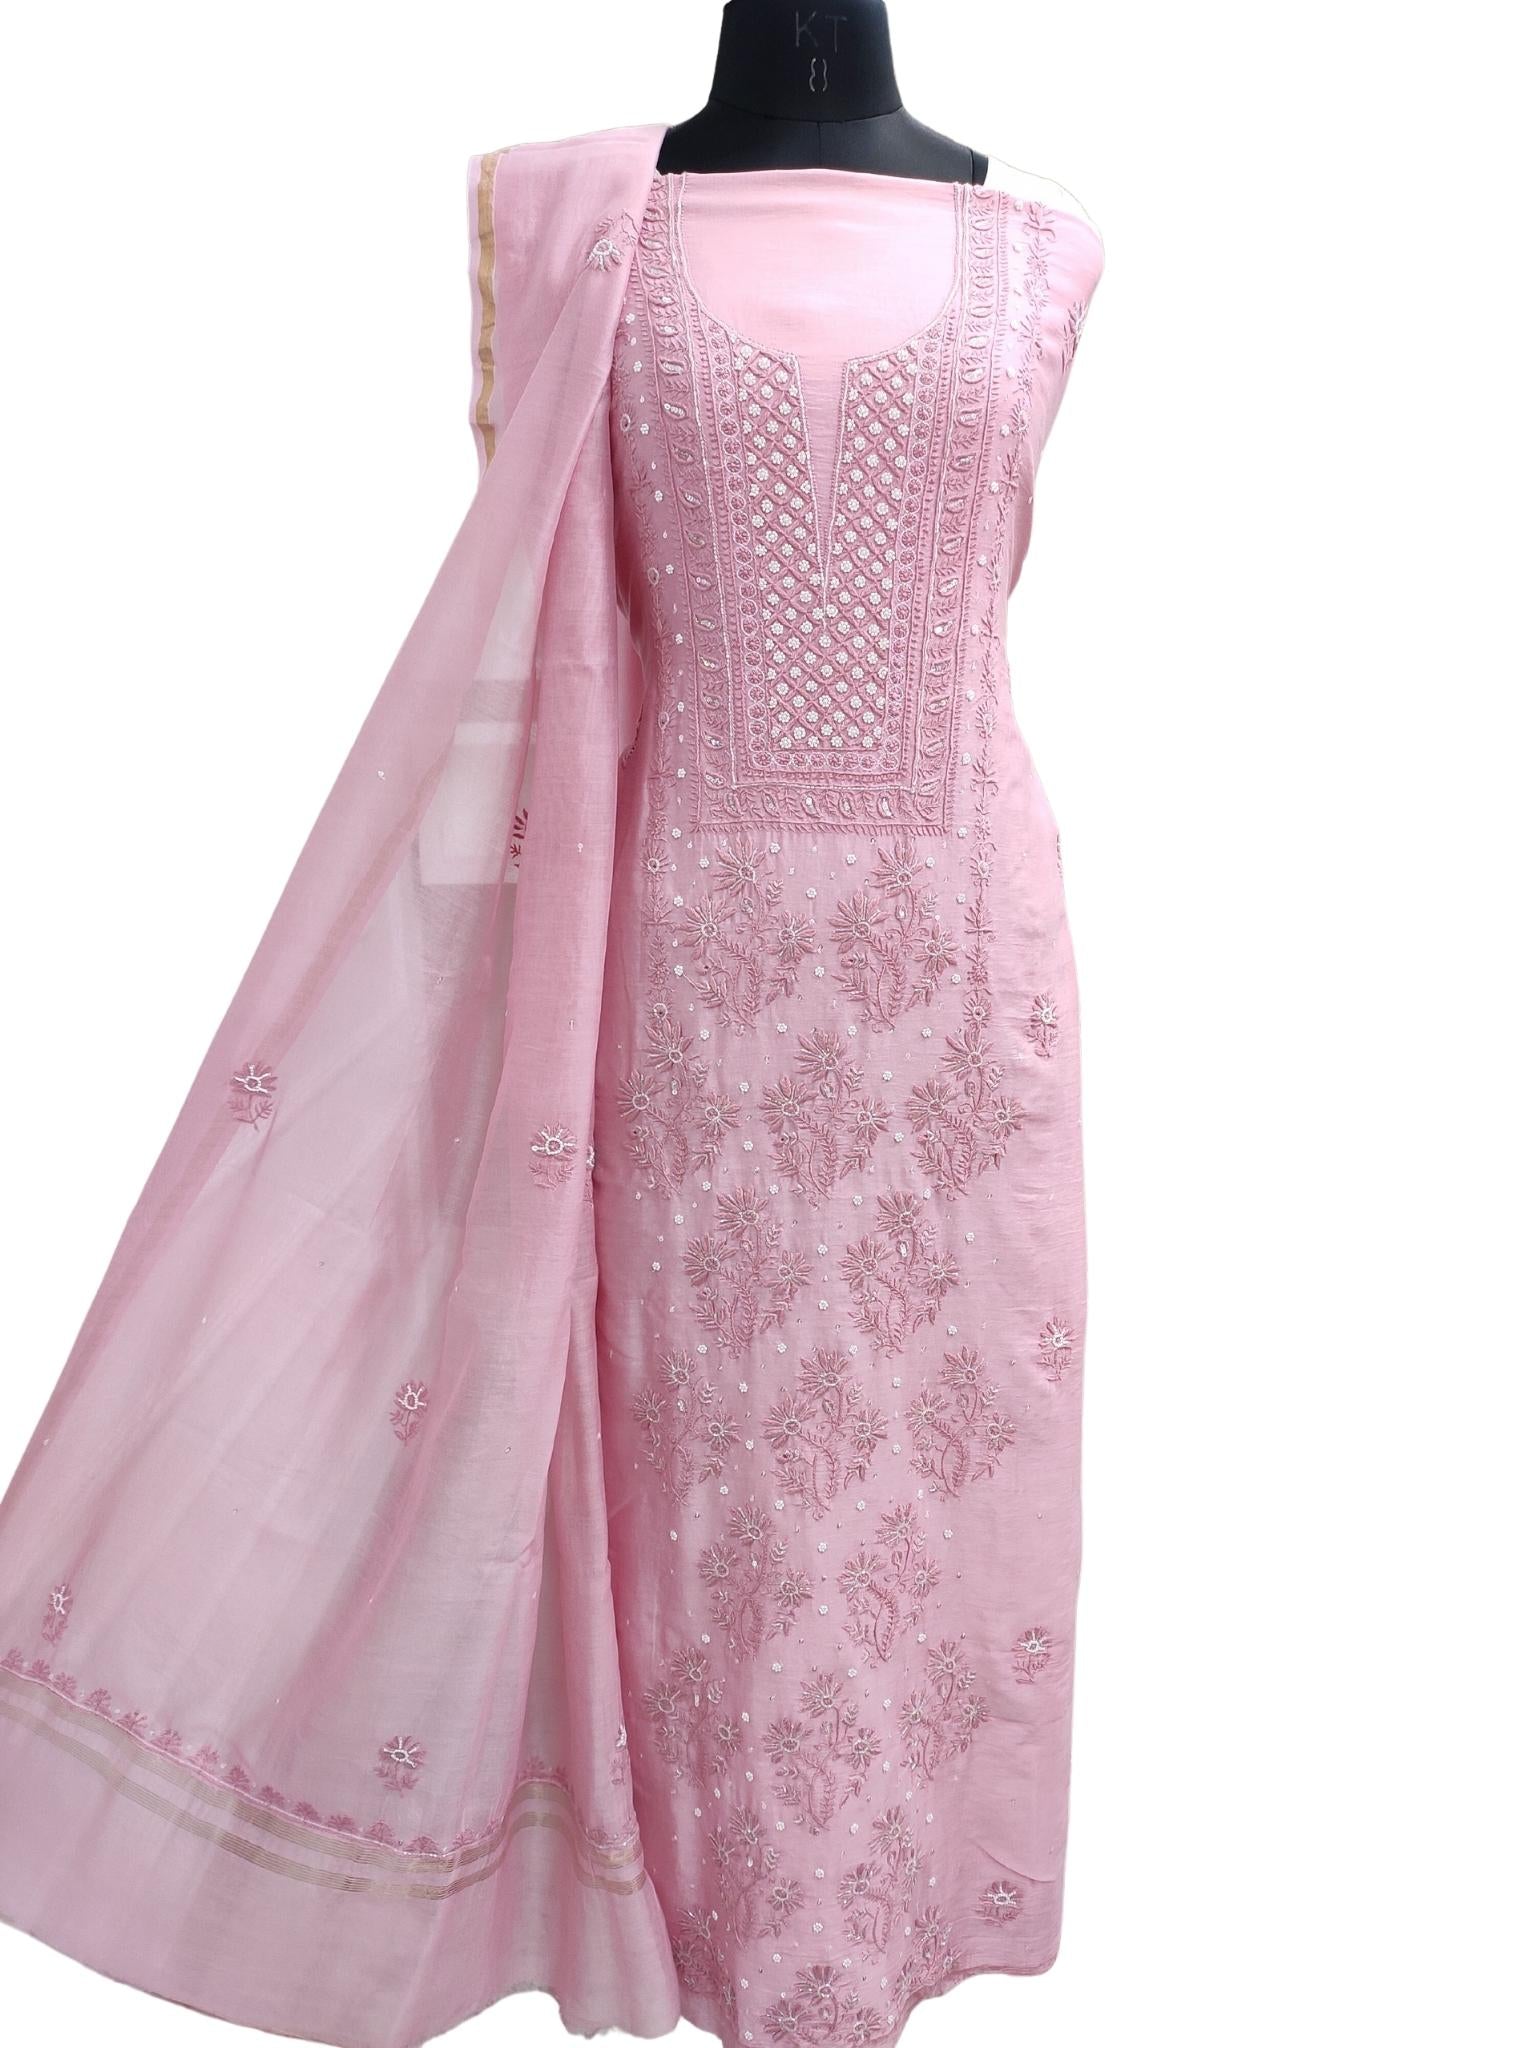 Shyamal Chikan Hand Embroidered Pink Chanderi Lucknowi Chikankari Unstitched Suit Piece with Pearl & Sequin Work (Set of 2) - S19389